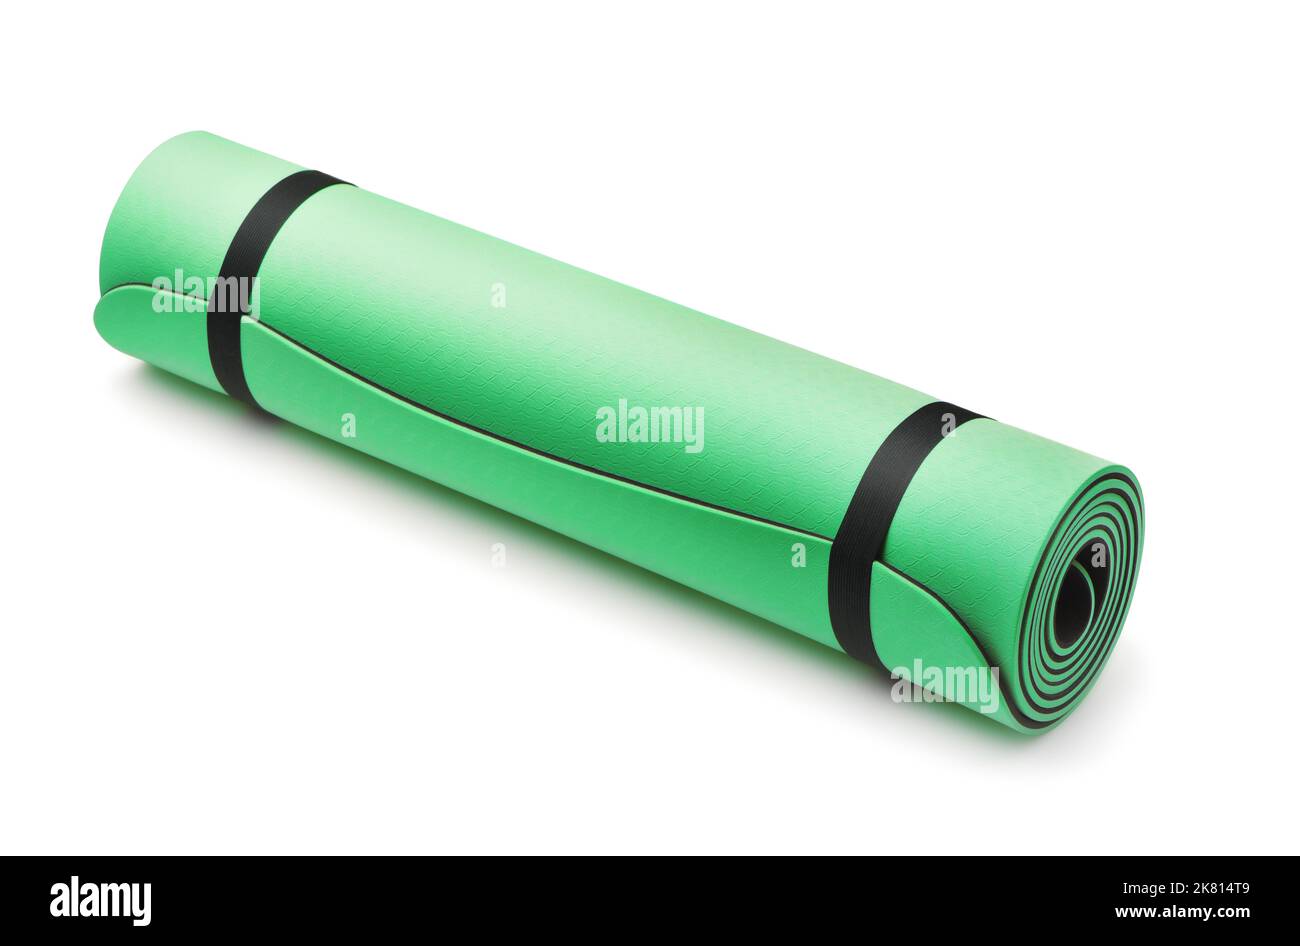 Rolled soft green foam yoga mat isolated on white Stock Photo